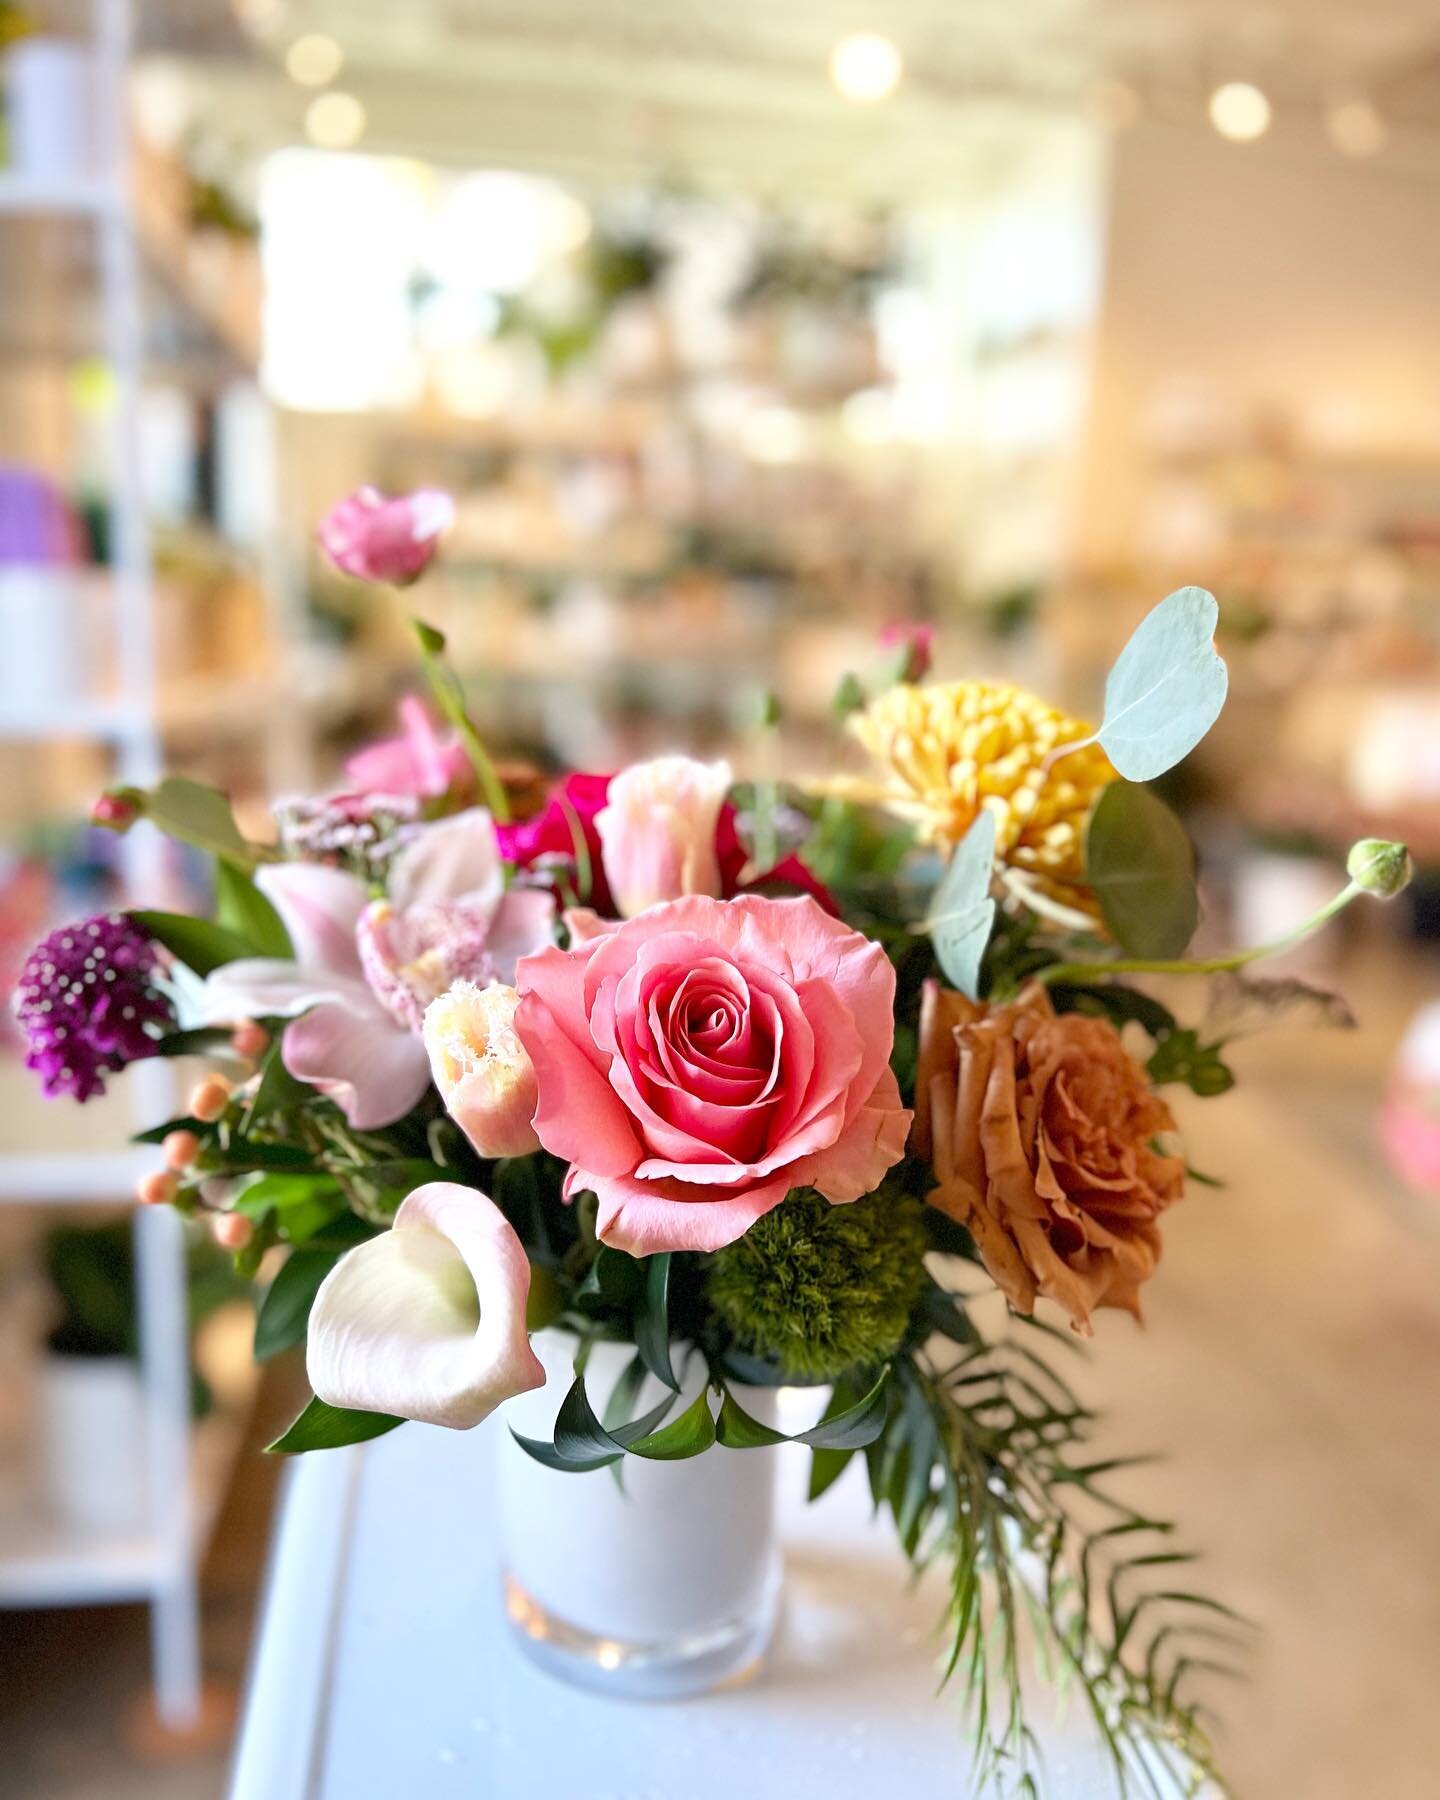 right now we lovin saga, toffee, and playa roses. you should smell the saga! #seattle #florist #seattleflorist #plants #plantsmakemehappy
#seattleflowers #cedarhouseflowers
#wallingford #localflowers #localbusiness
#blackownedbusiness 
#smallbusiness